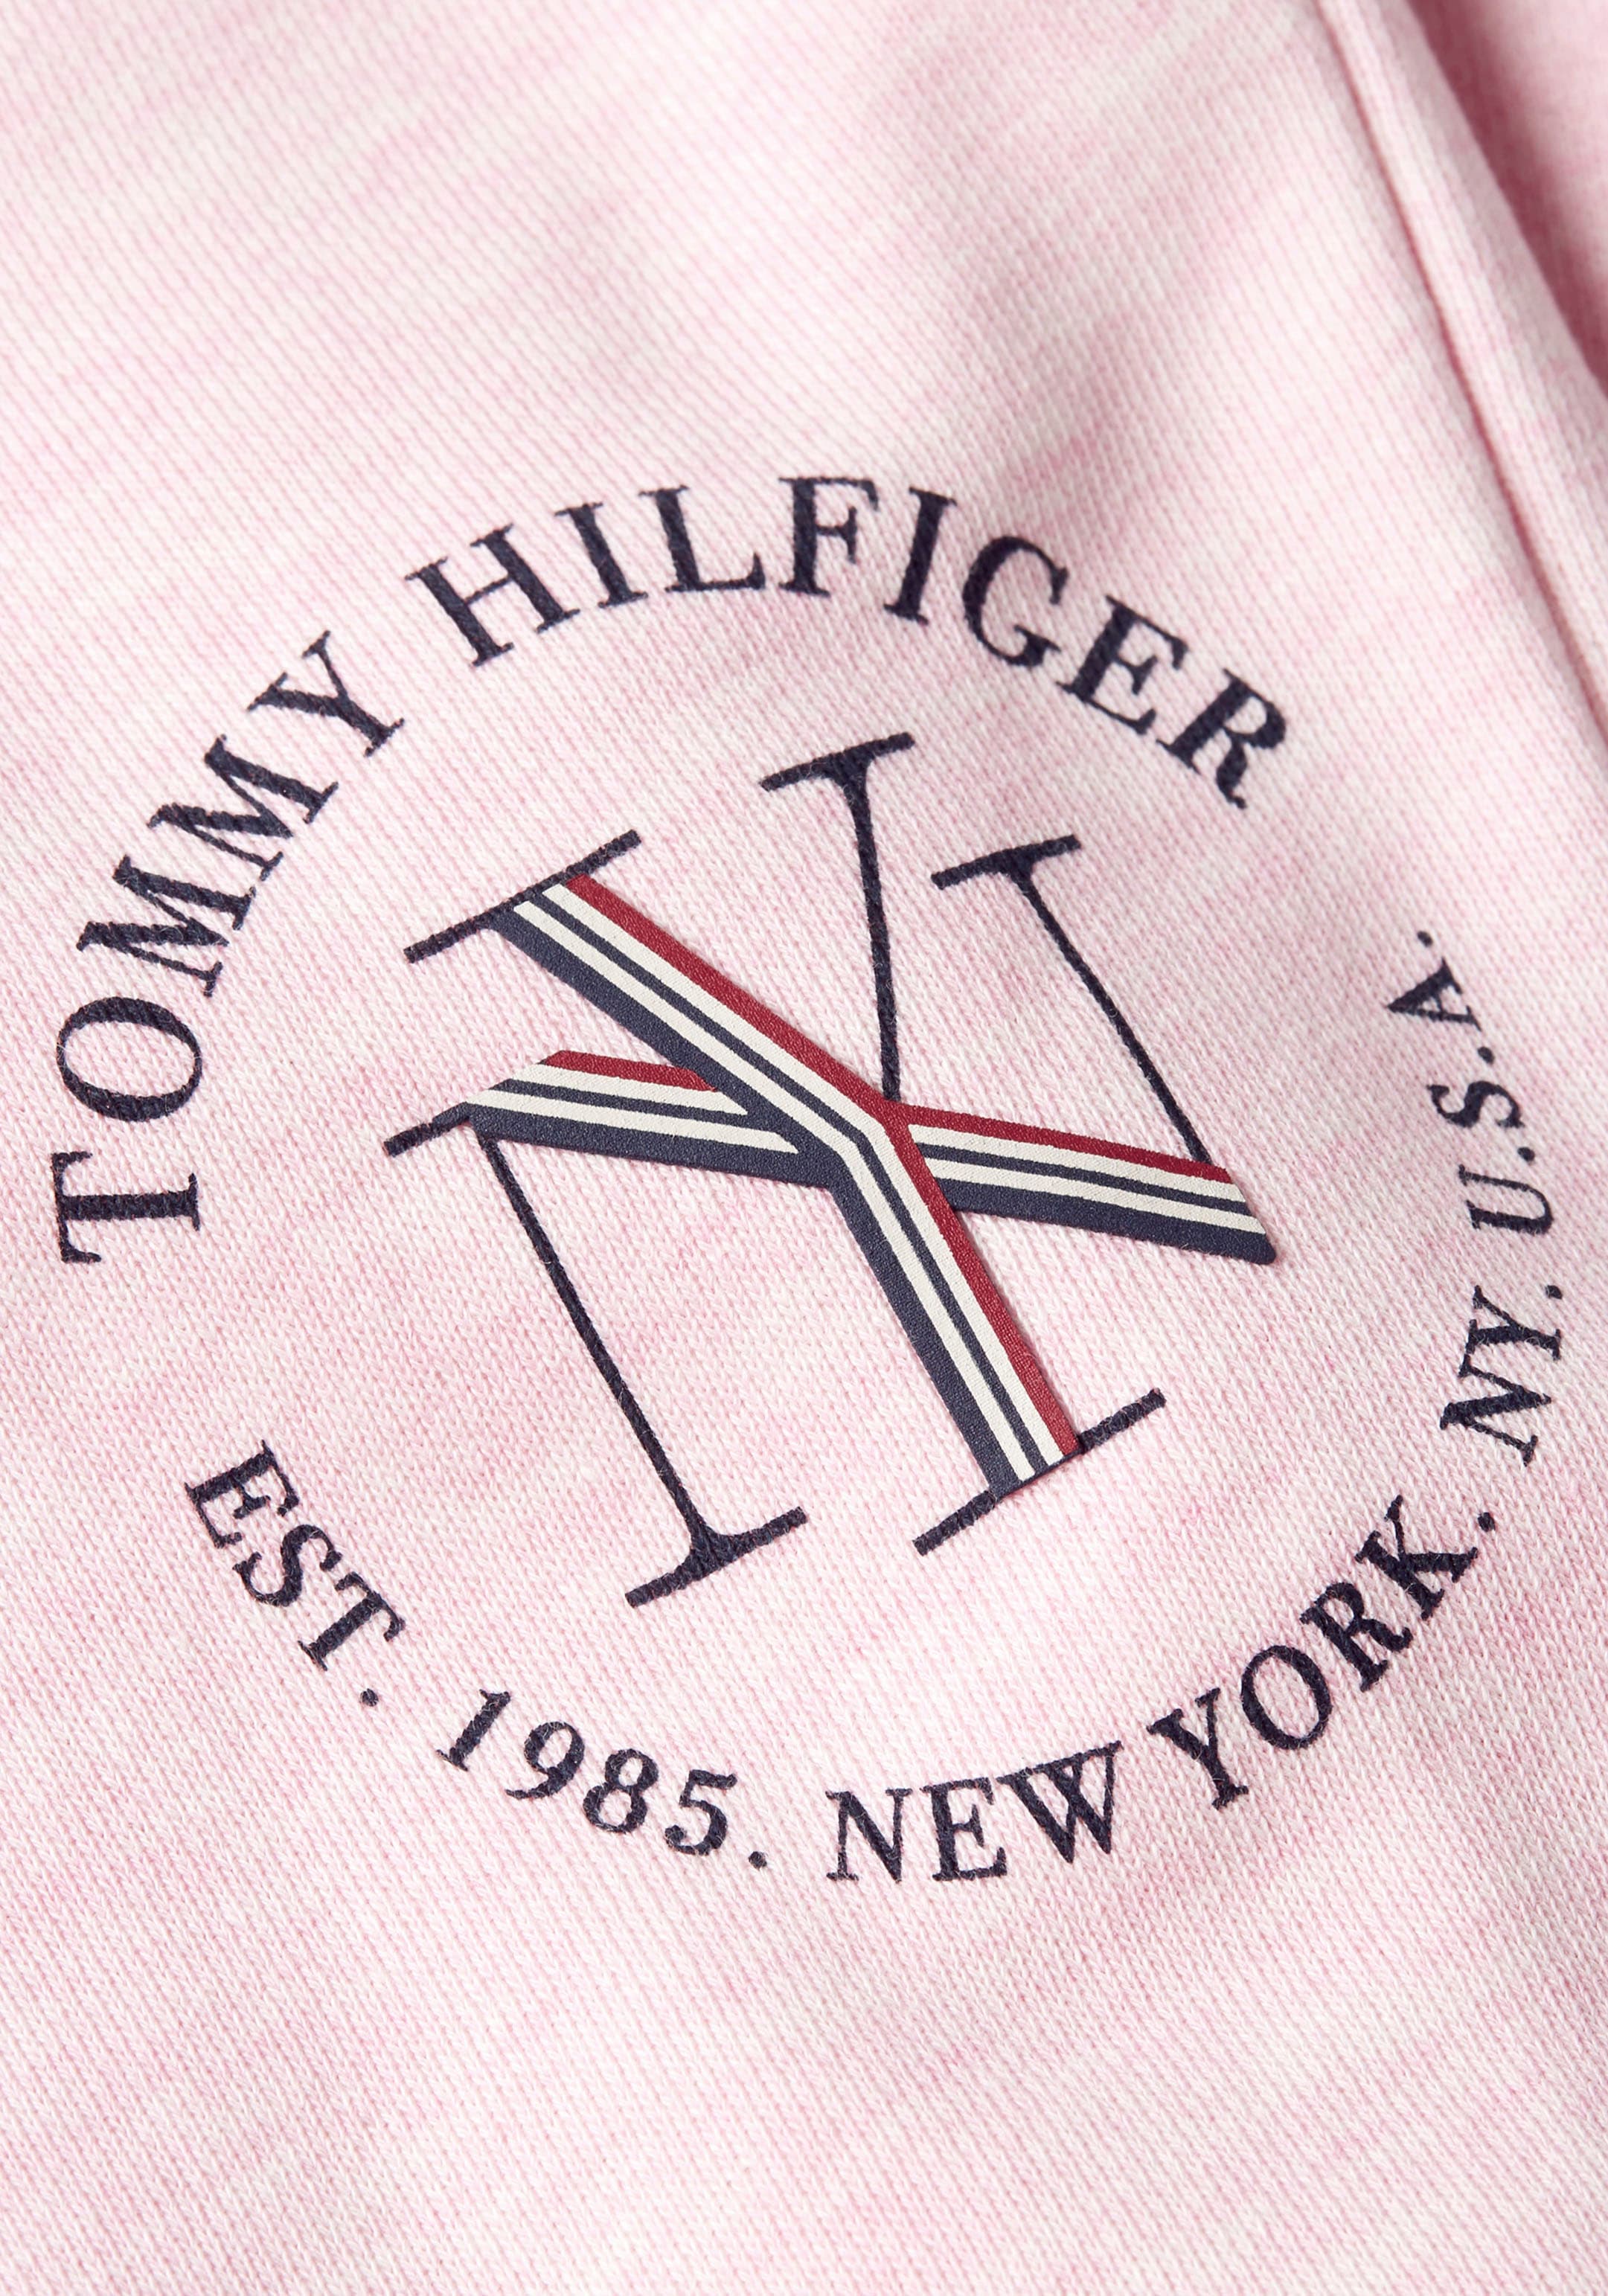 Tommy Hilfiger Sweatpants »TAPERED ROUNDALL Hilfiger SWEATPANTS«, Markenlabel NYC bei ♕ mit Tommy